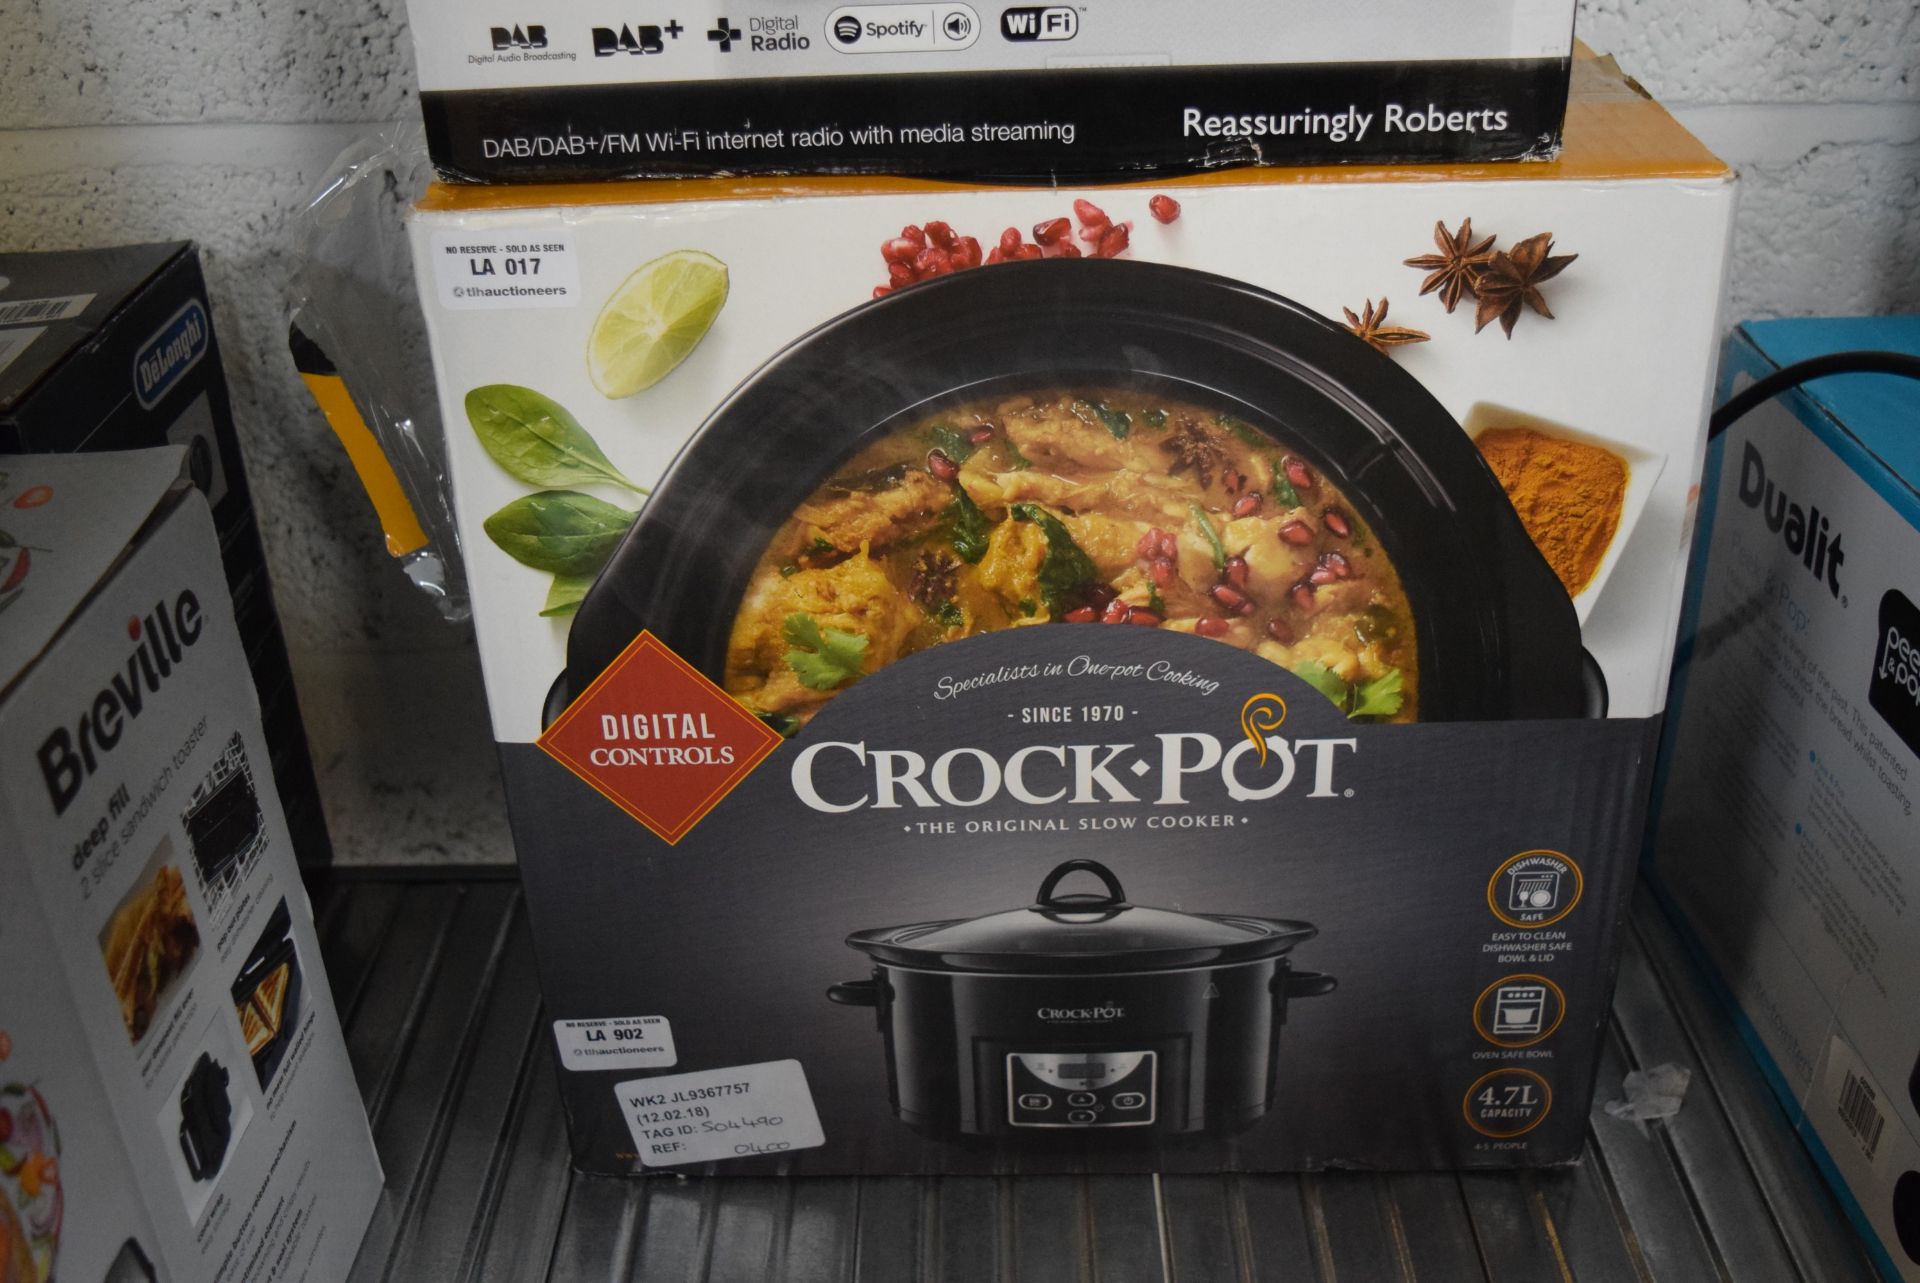 1 x BOXED CROCK POT THE ORIGINAL SLOW COOKER RRP £40 12.02.18 504490 *PLEASE NOTE THAT THE BID PRICE